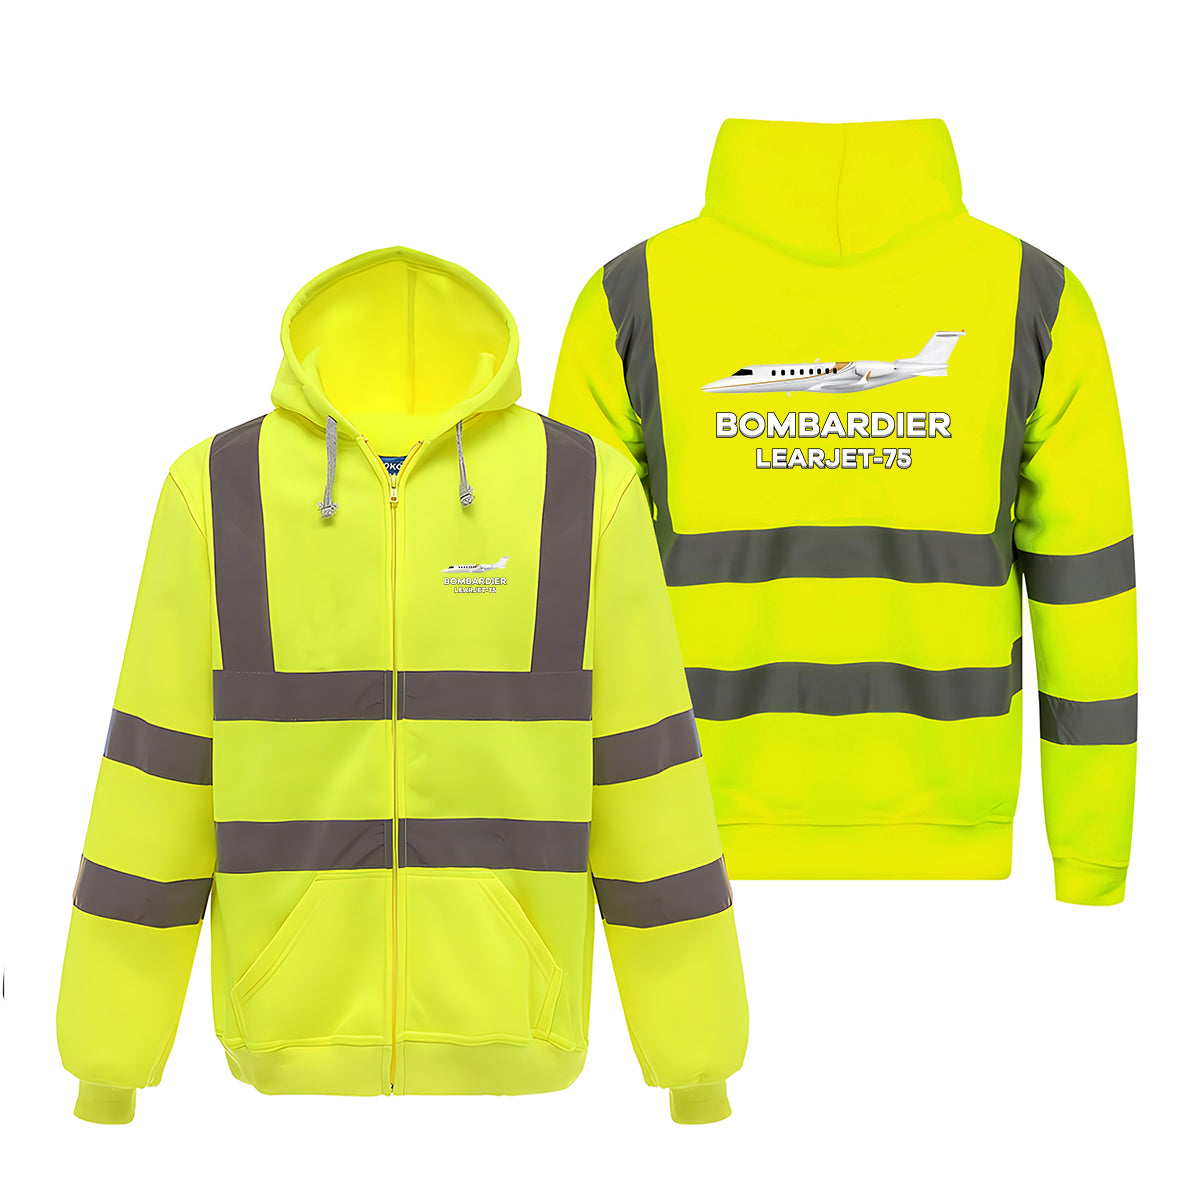 The Bombardier Learjet 75 Designed Reflective Zipped Hoodies